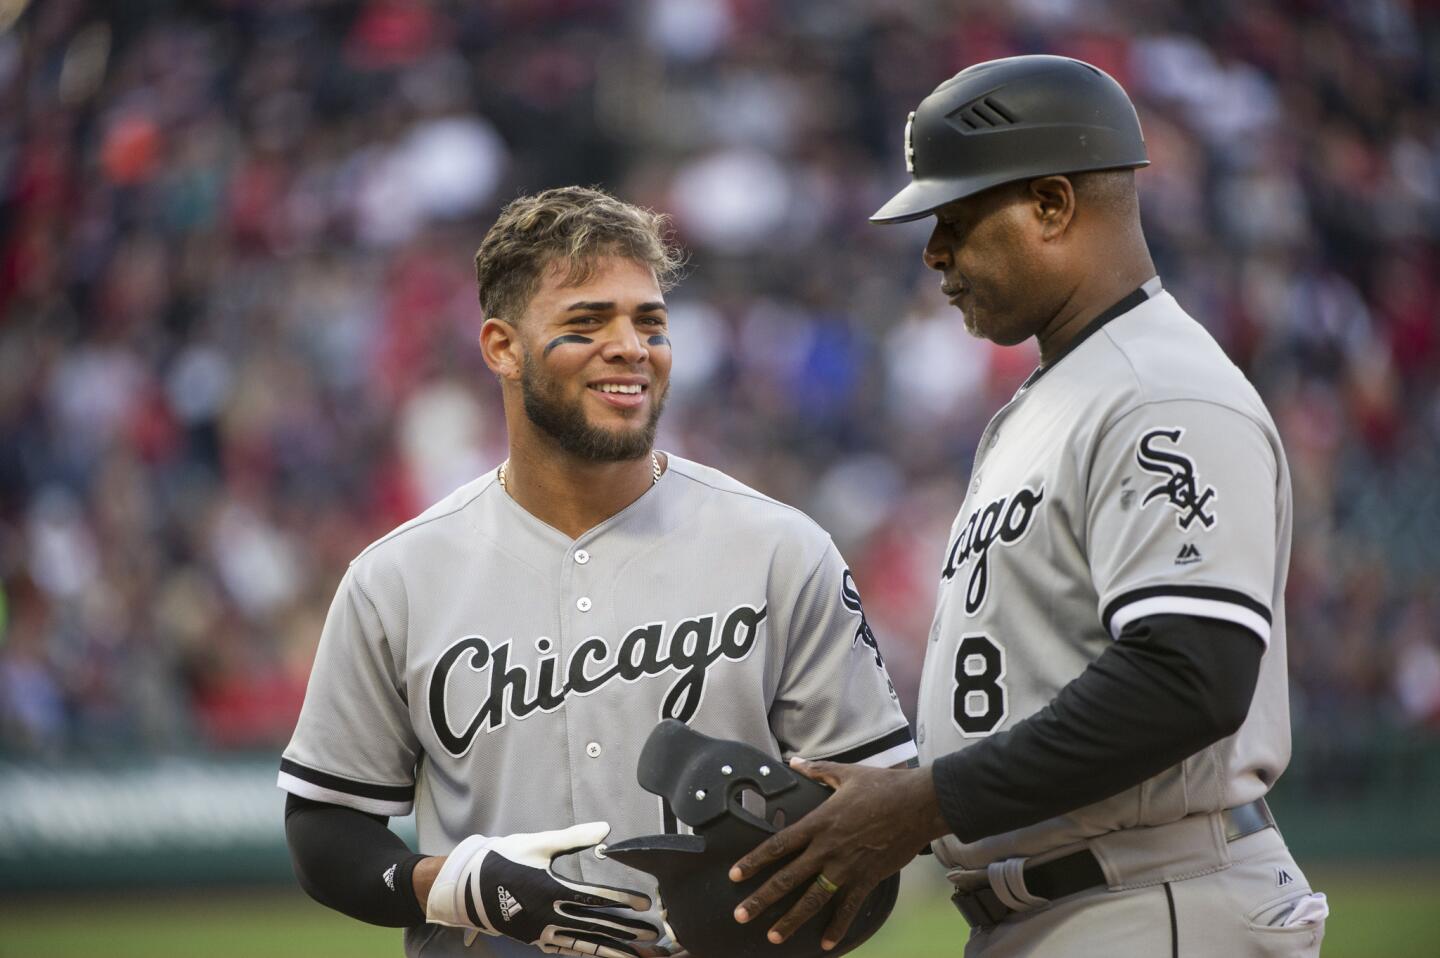 White Sox second baseman Yoan Moncada talks with first base coach Daryl Boston during a game against the Indians in Cleveland, Sunday, Oct. 1, 2017.